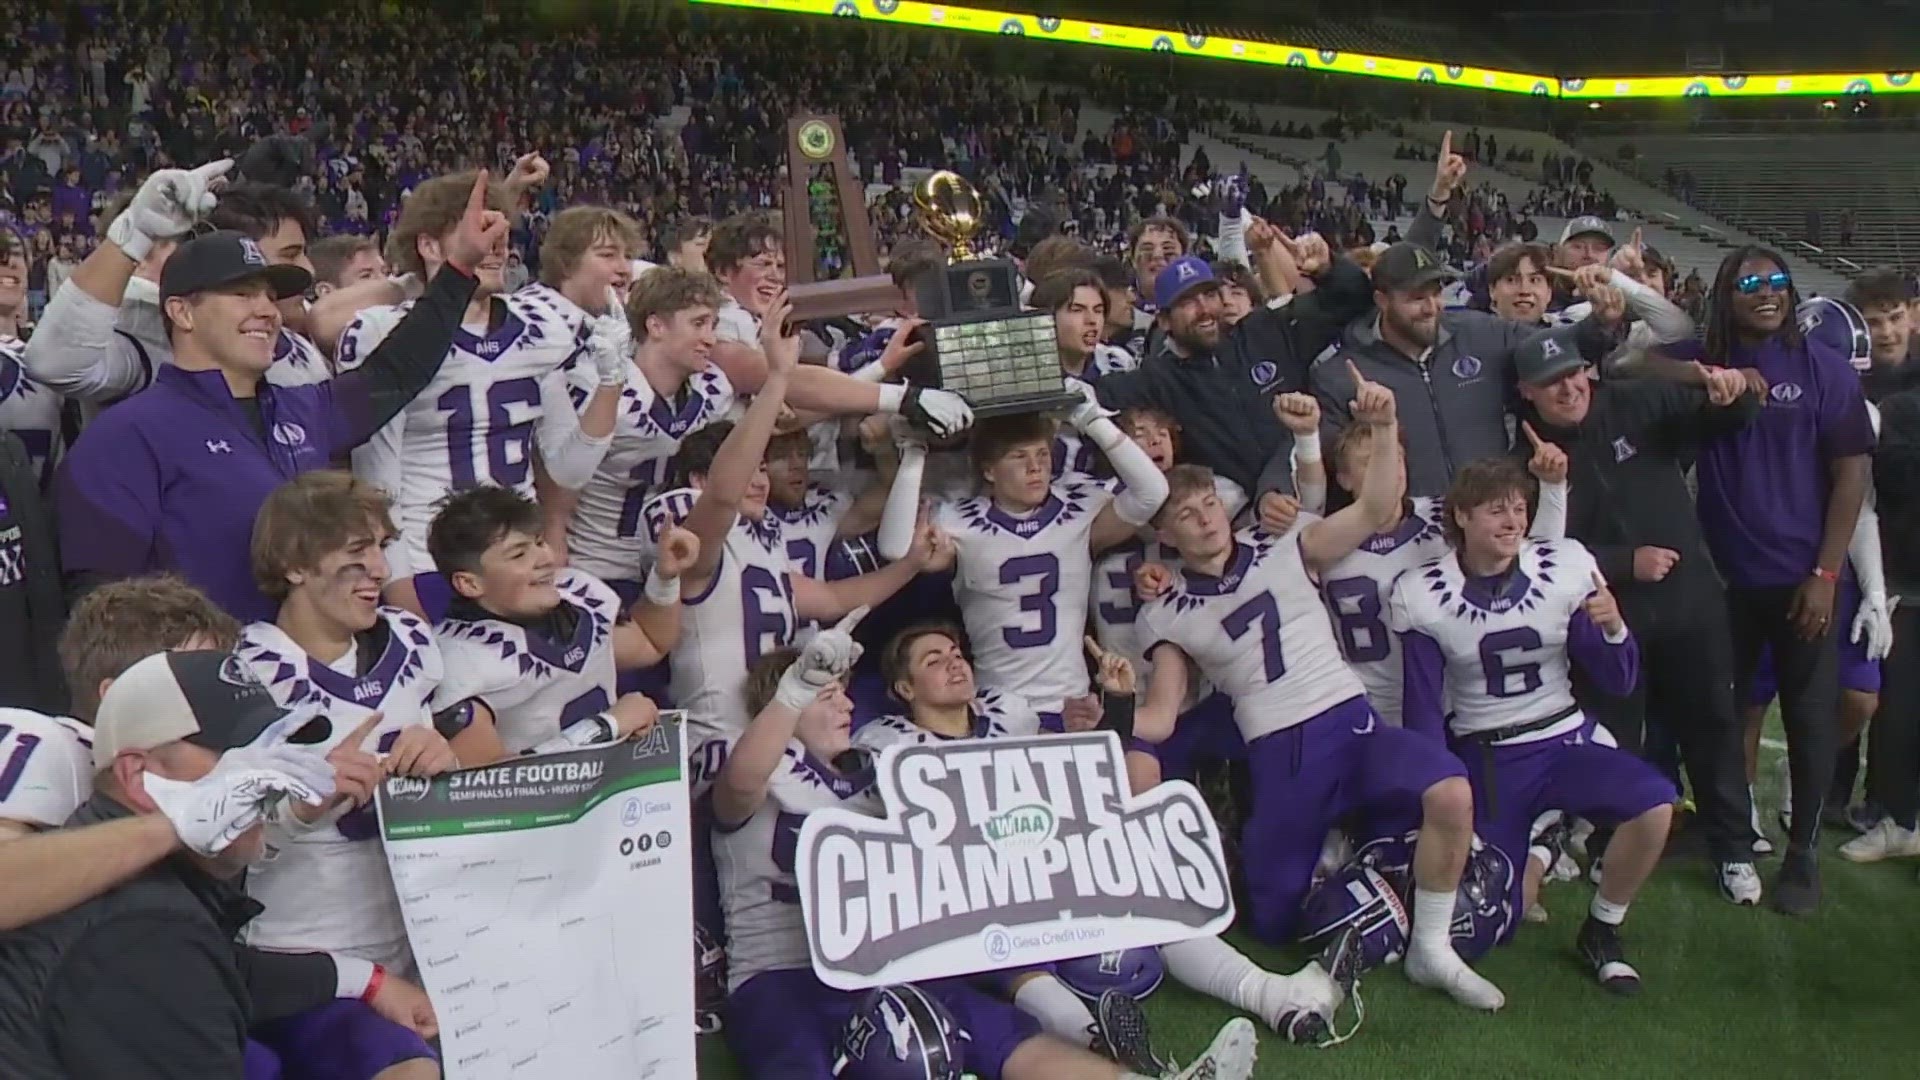 The Anacortes football team made history, a major accomplishment for a school that didn't even have a varsity team in 2019.